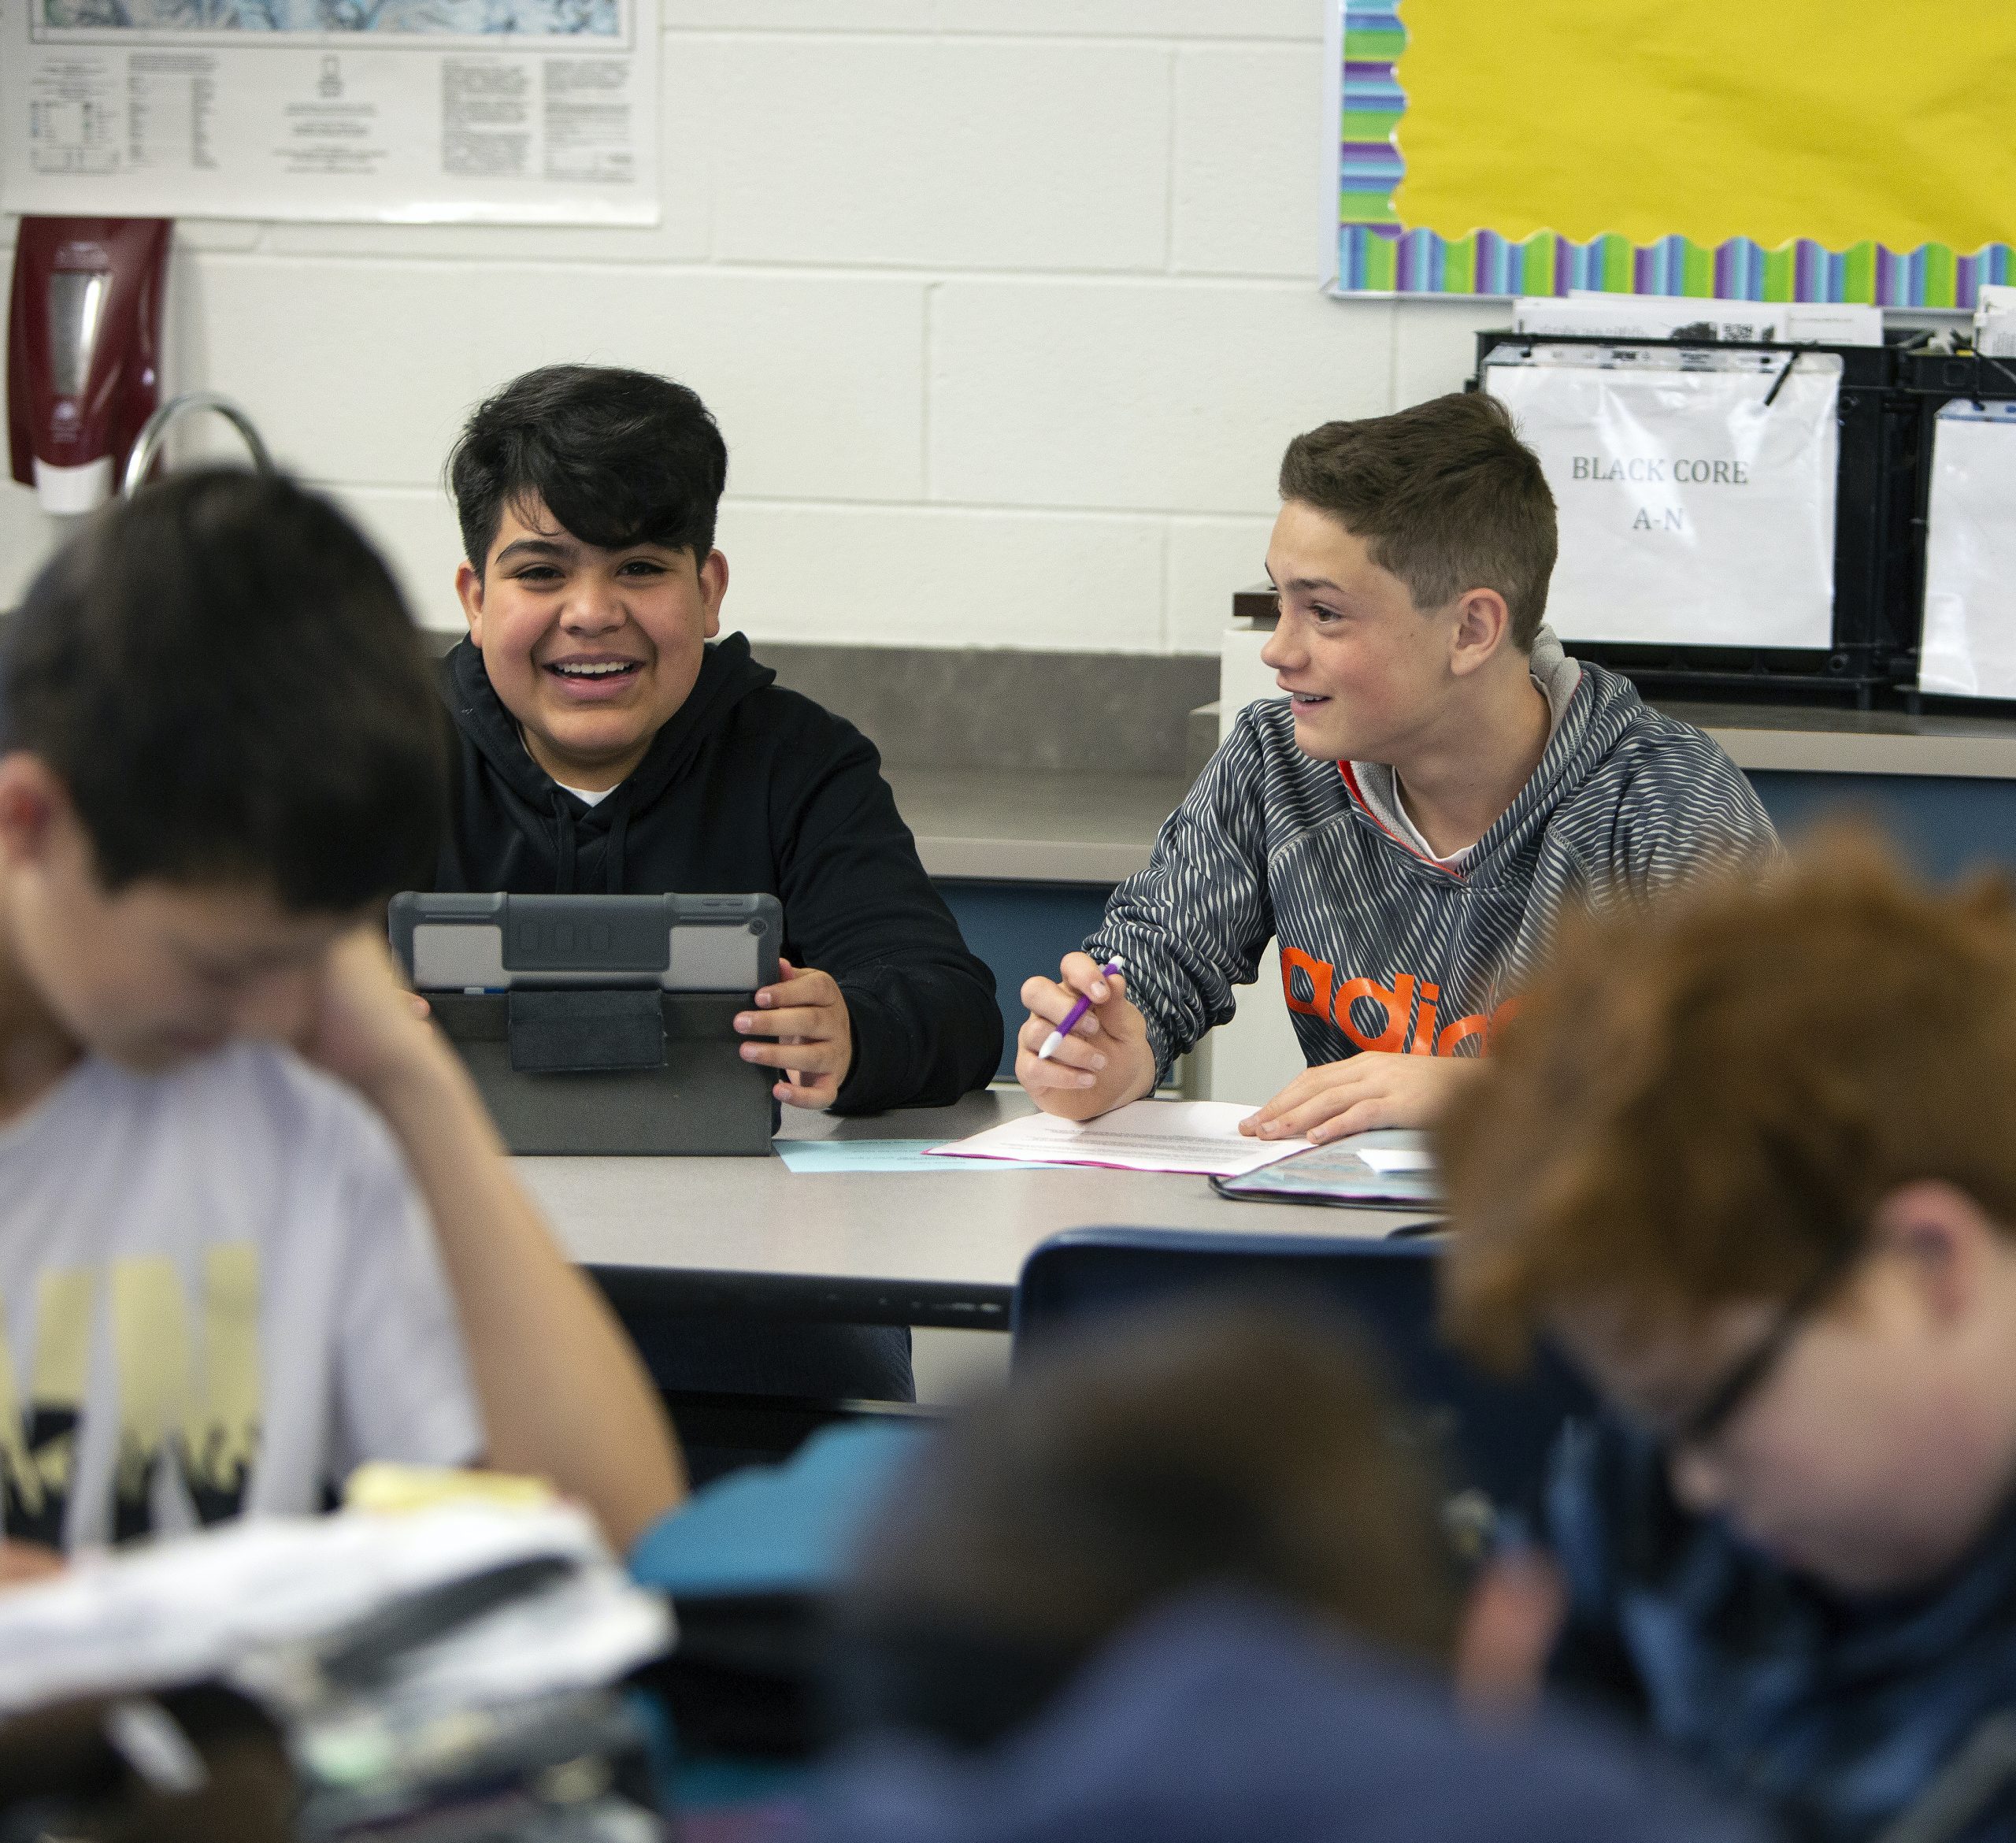 Two boys smiling during class with iPad